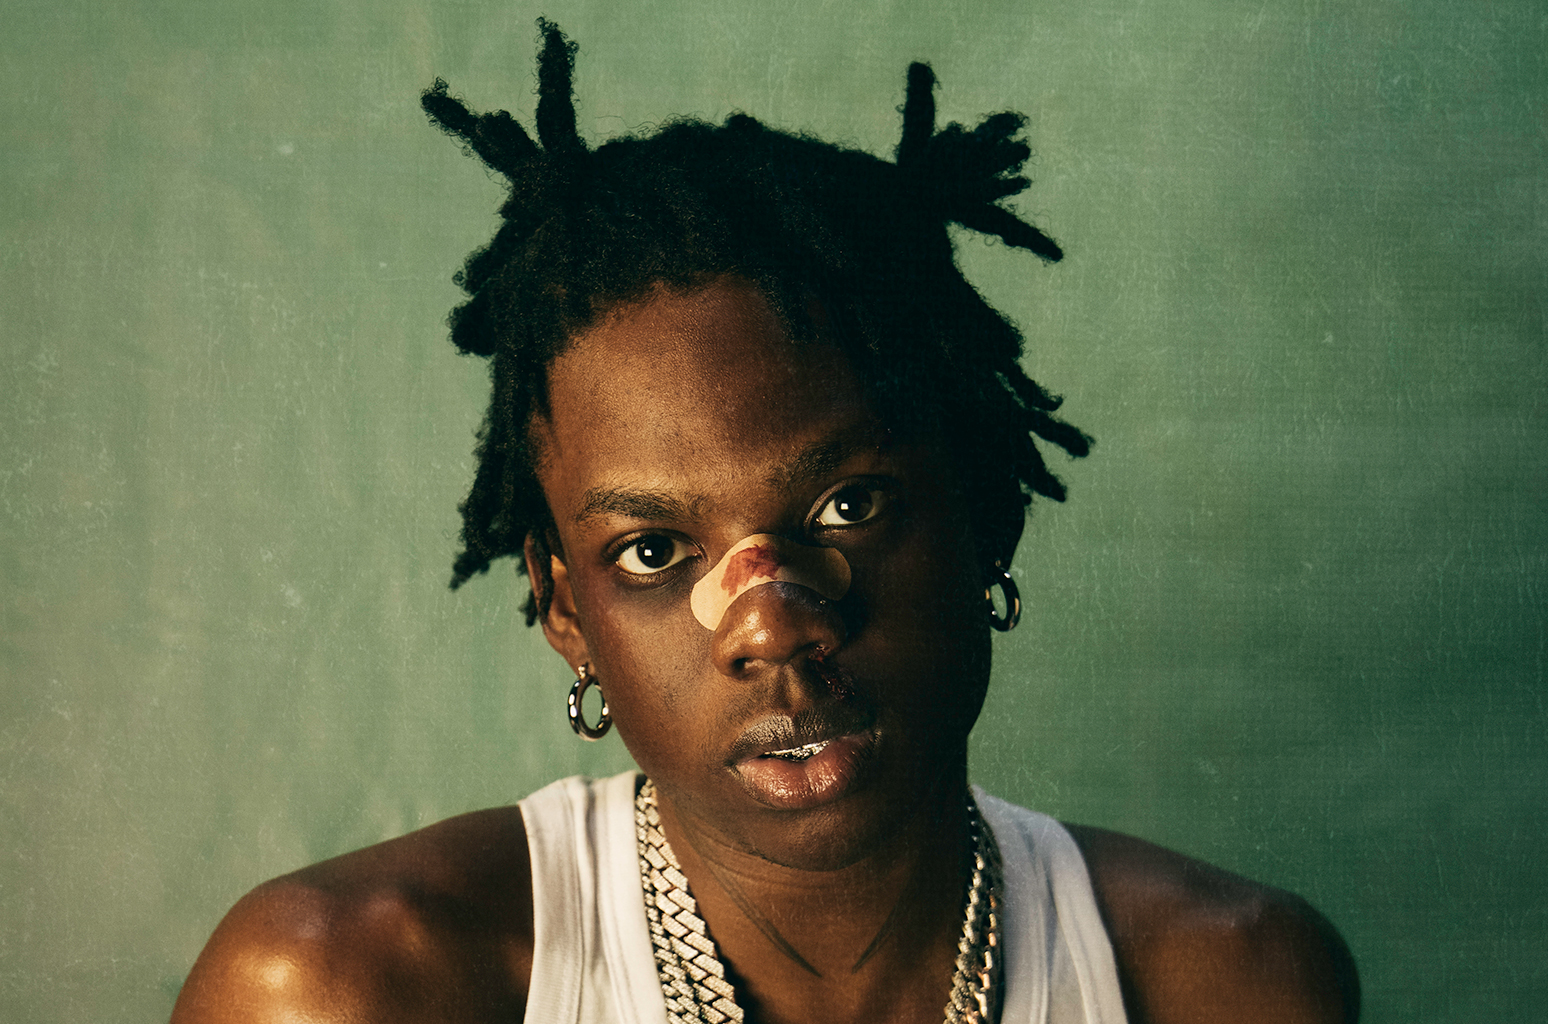 Rema speaks evolving his sound, making art that would endure for decades